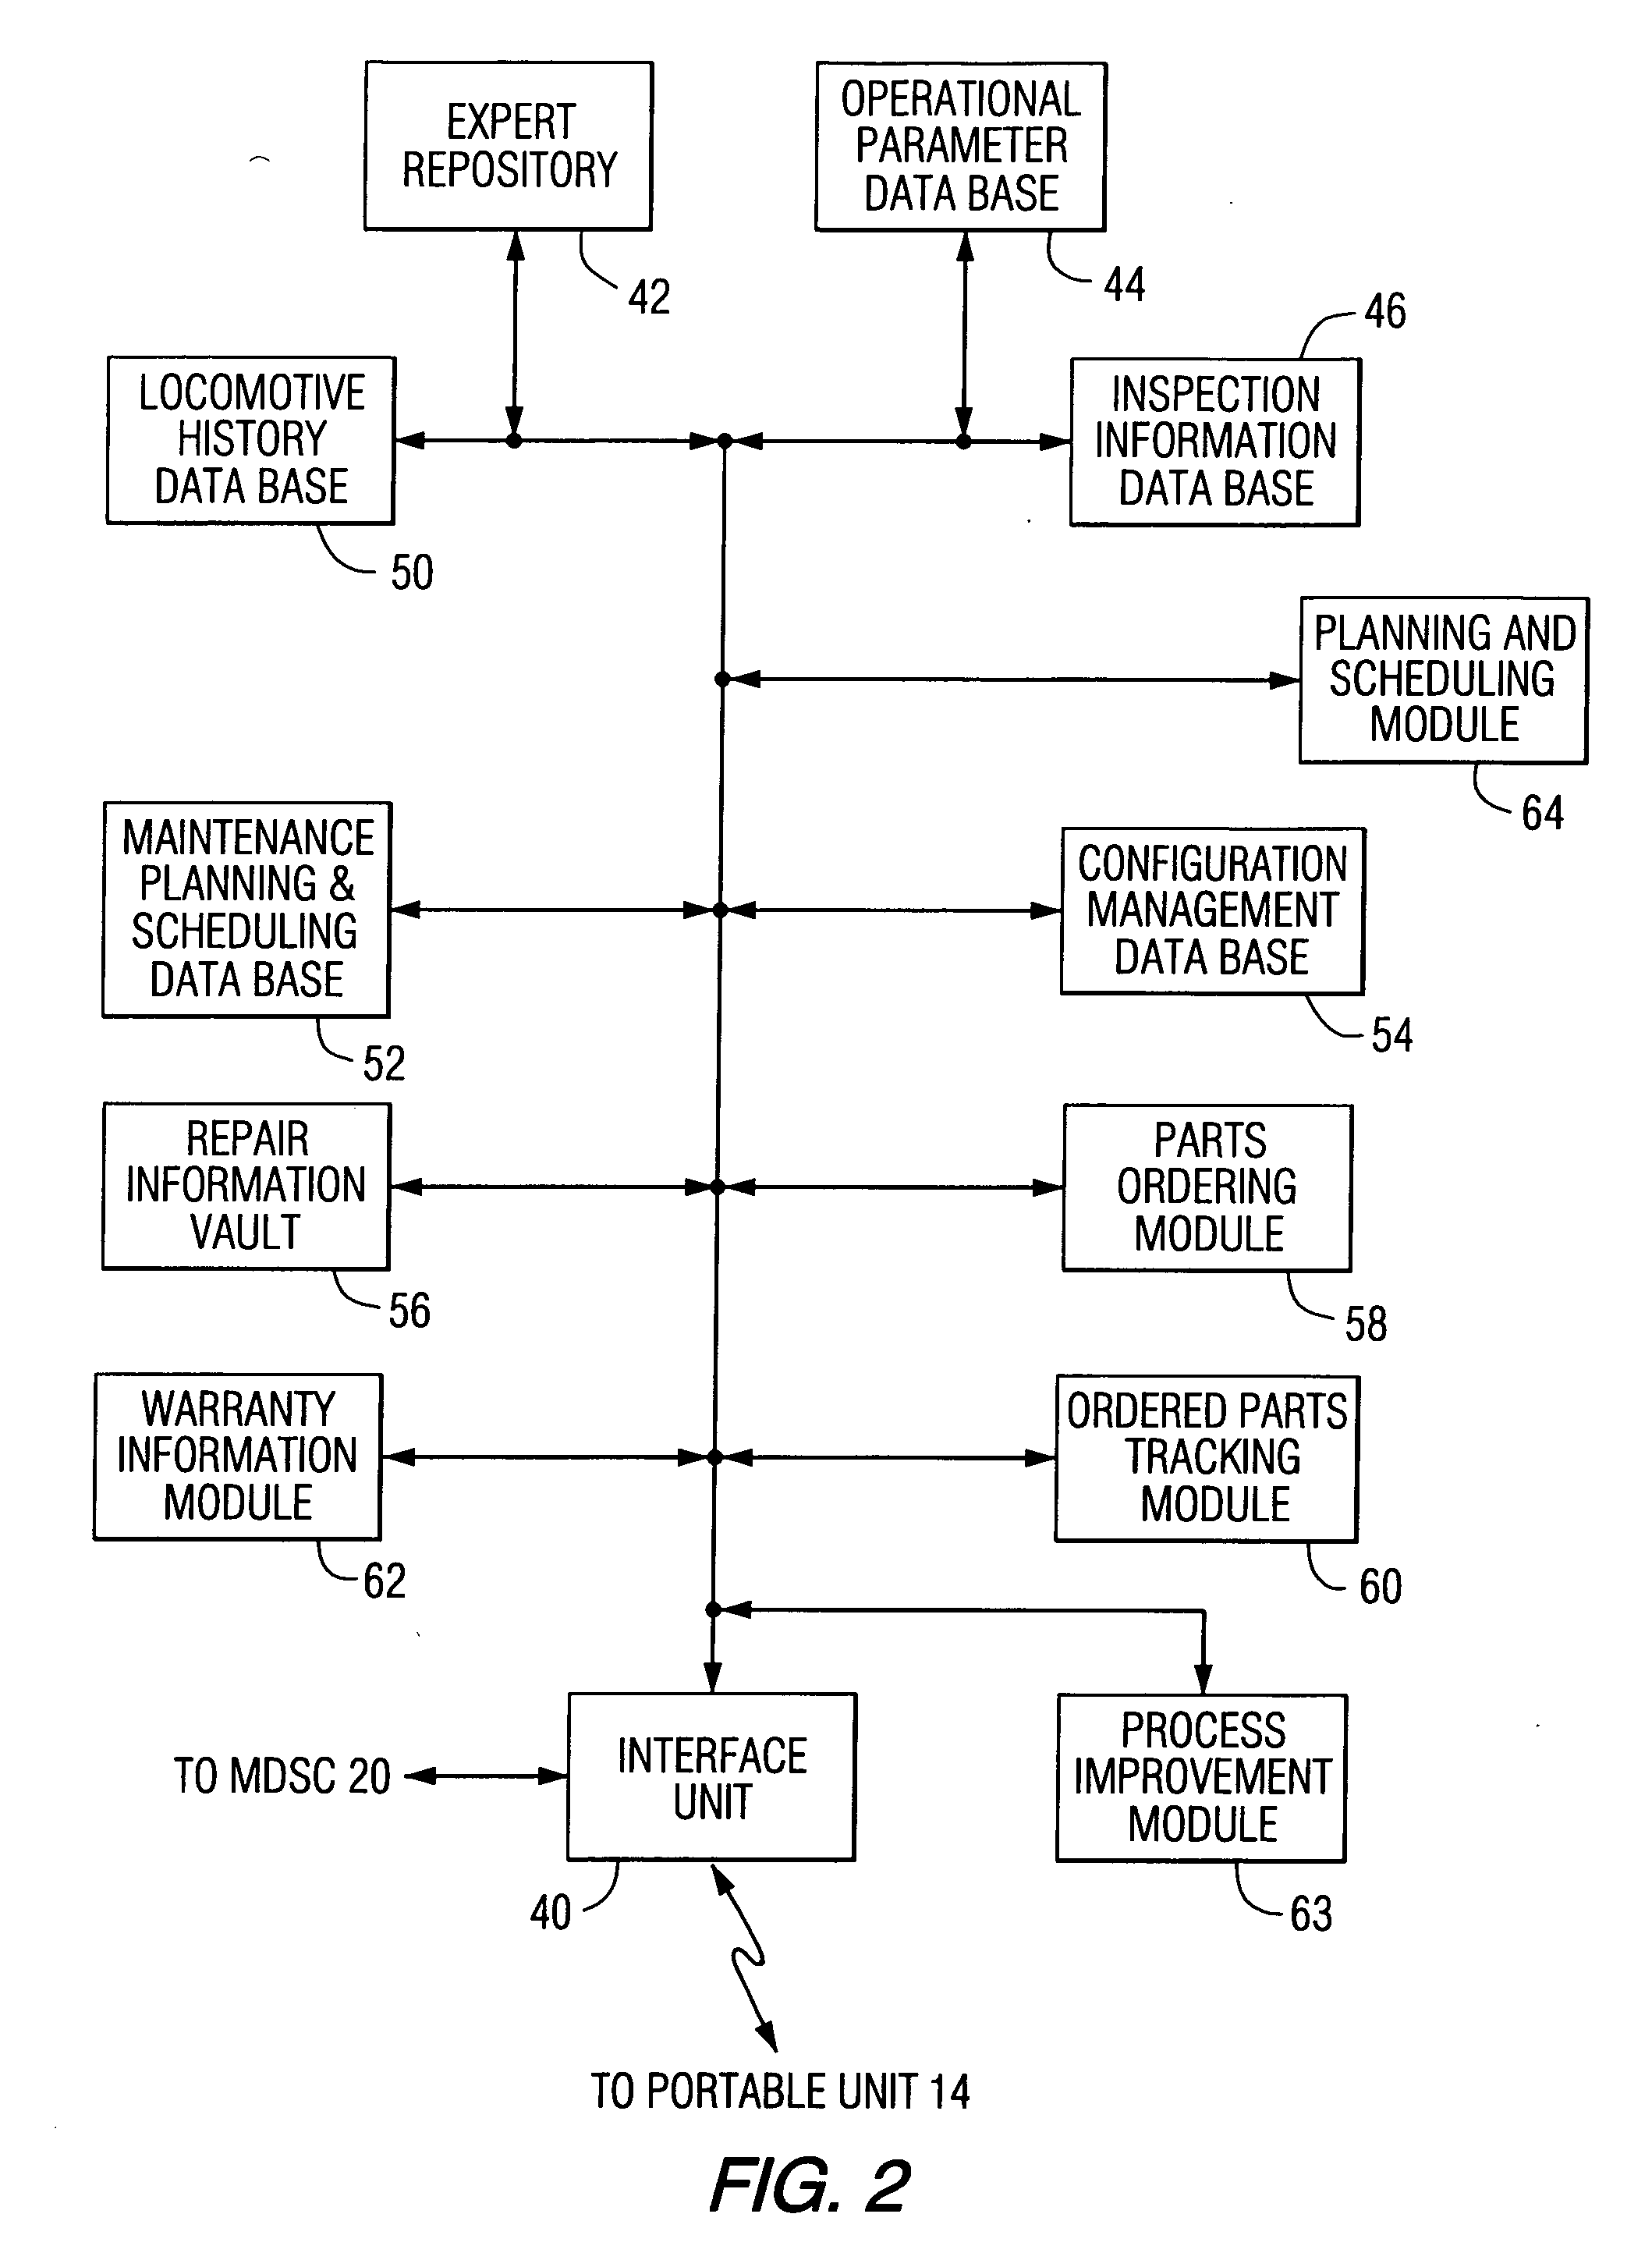 Method for guiding repair or replacement of parts for generally complex equipment